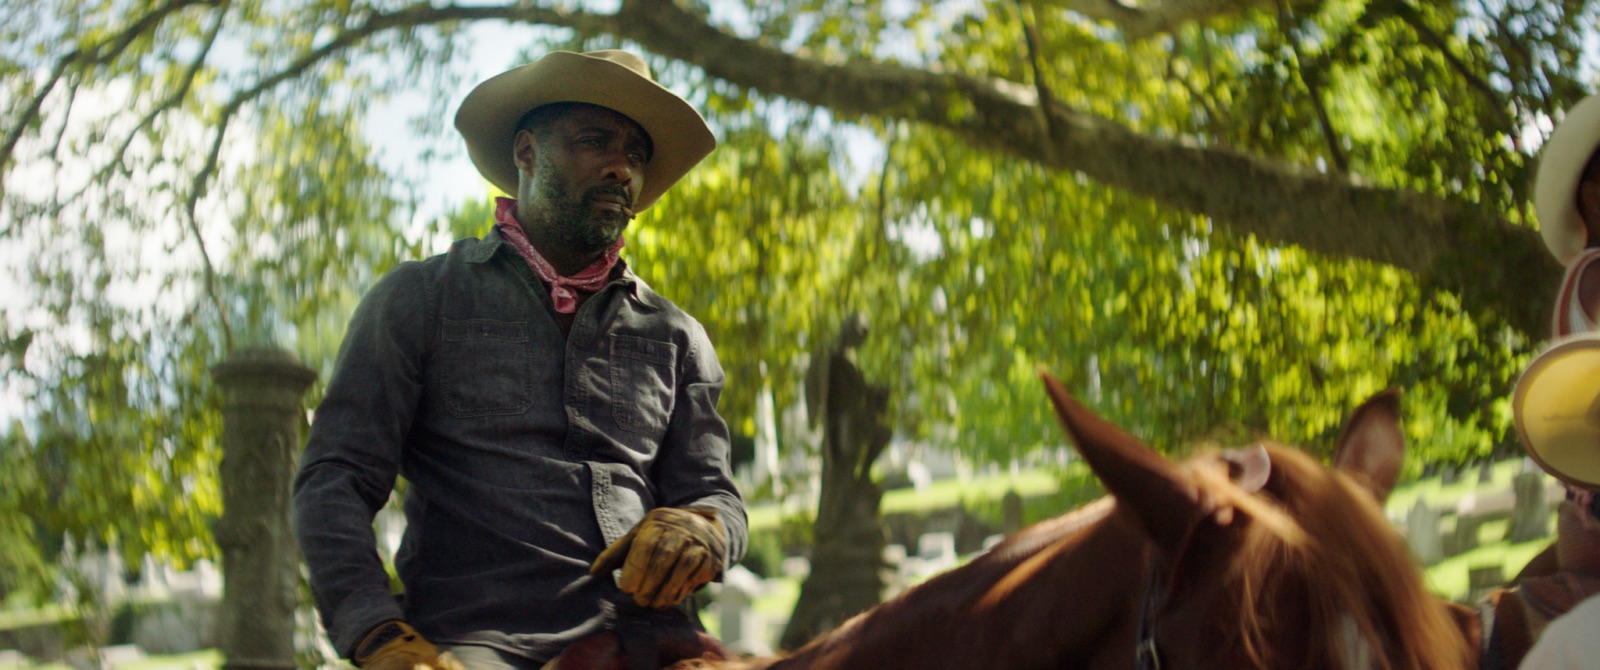 Who are the cowboys in town to whom the last western channel of Netflix starring Idris Elba is dedicated